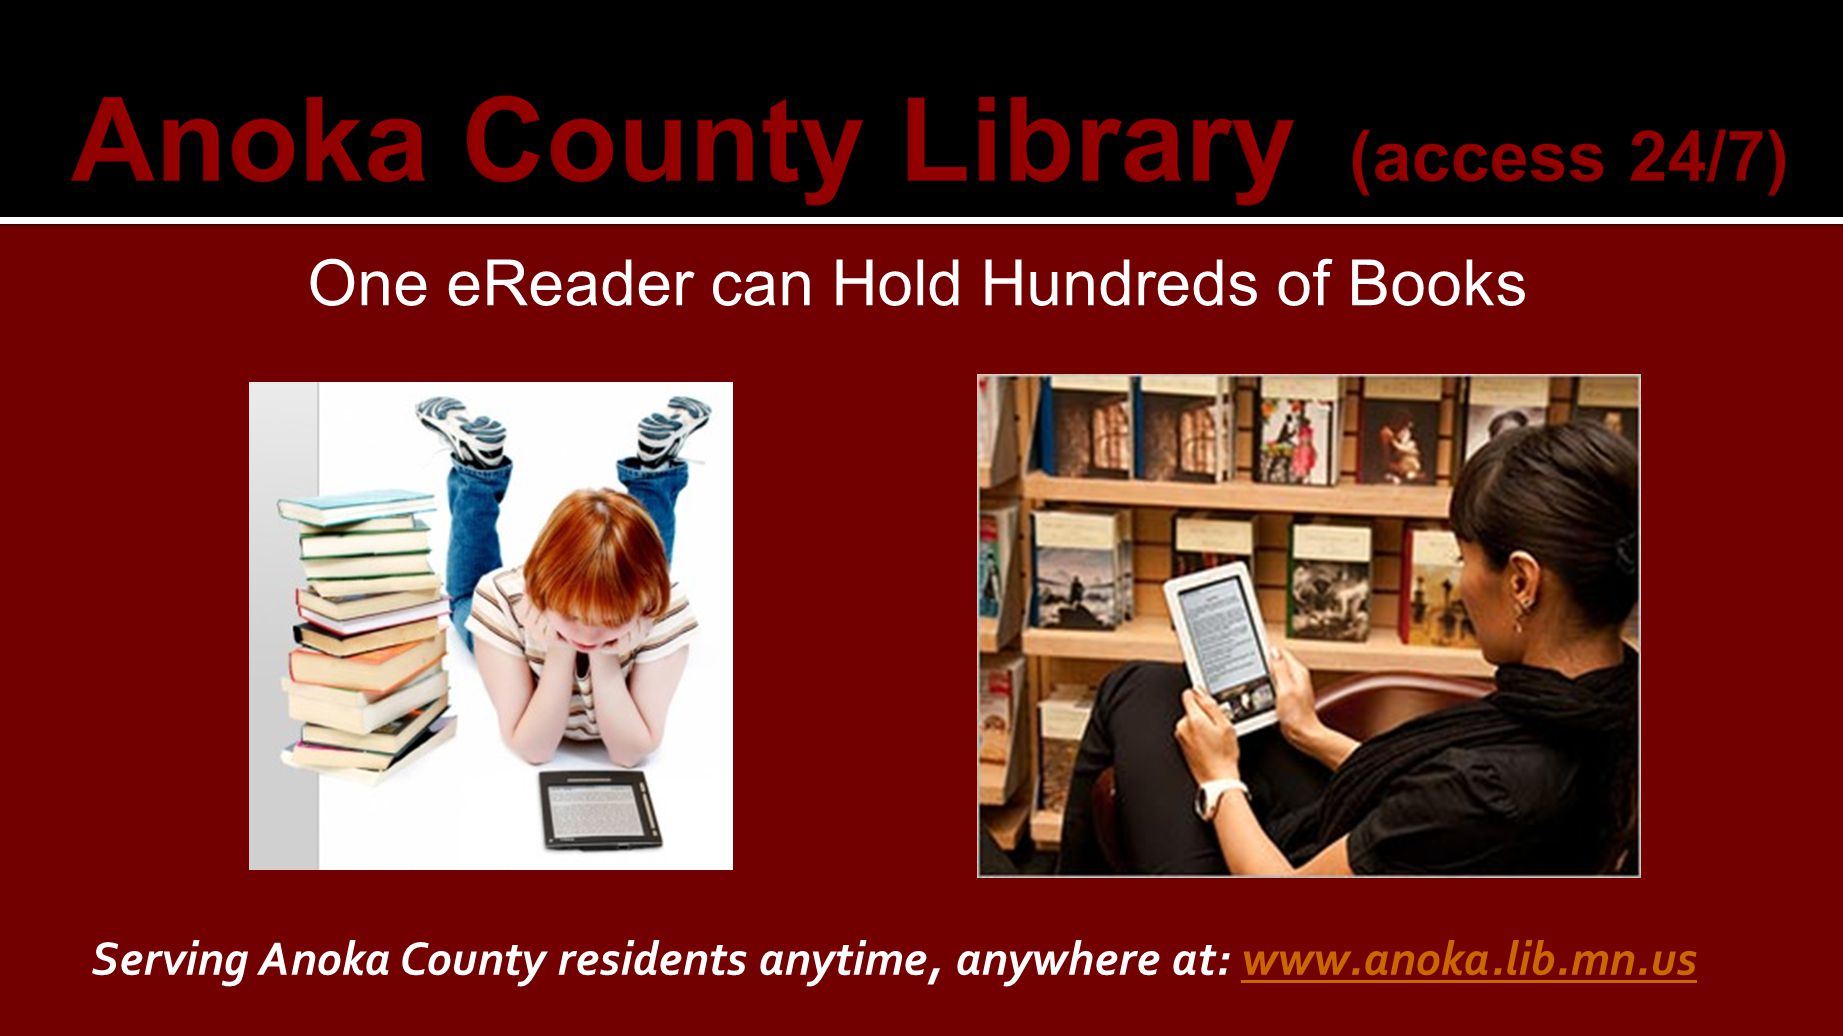 One eReader can Hold Hundreds of Books Serving Anoka County residents anytime, anywhere at: